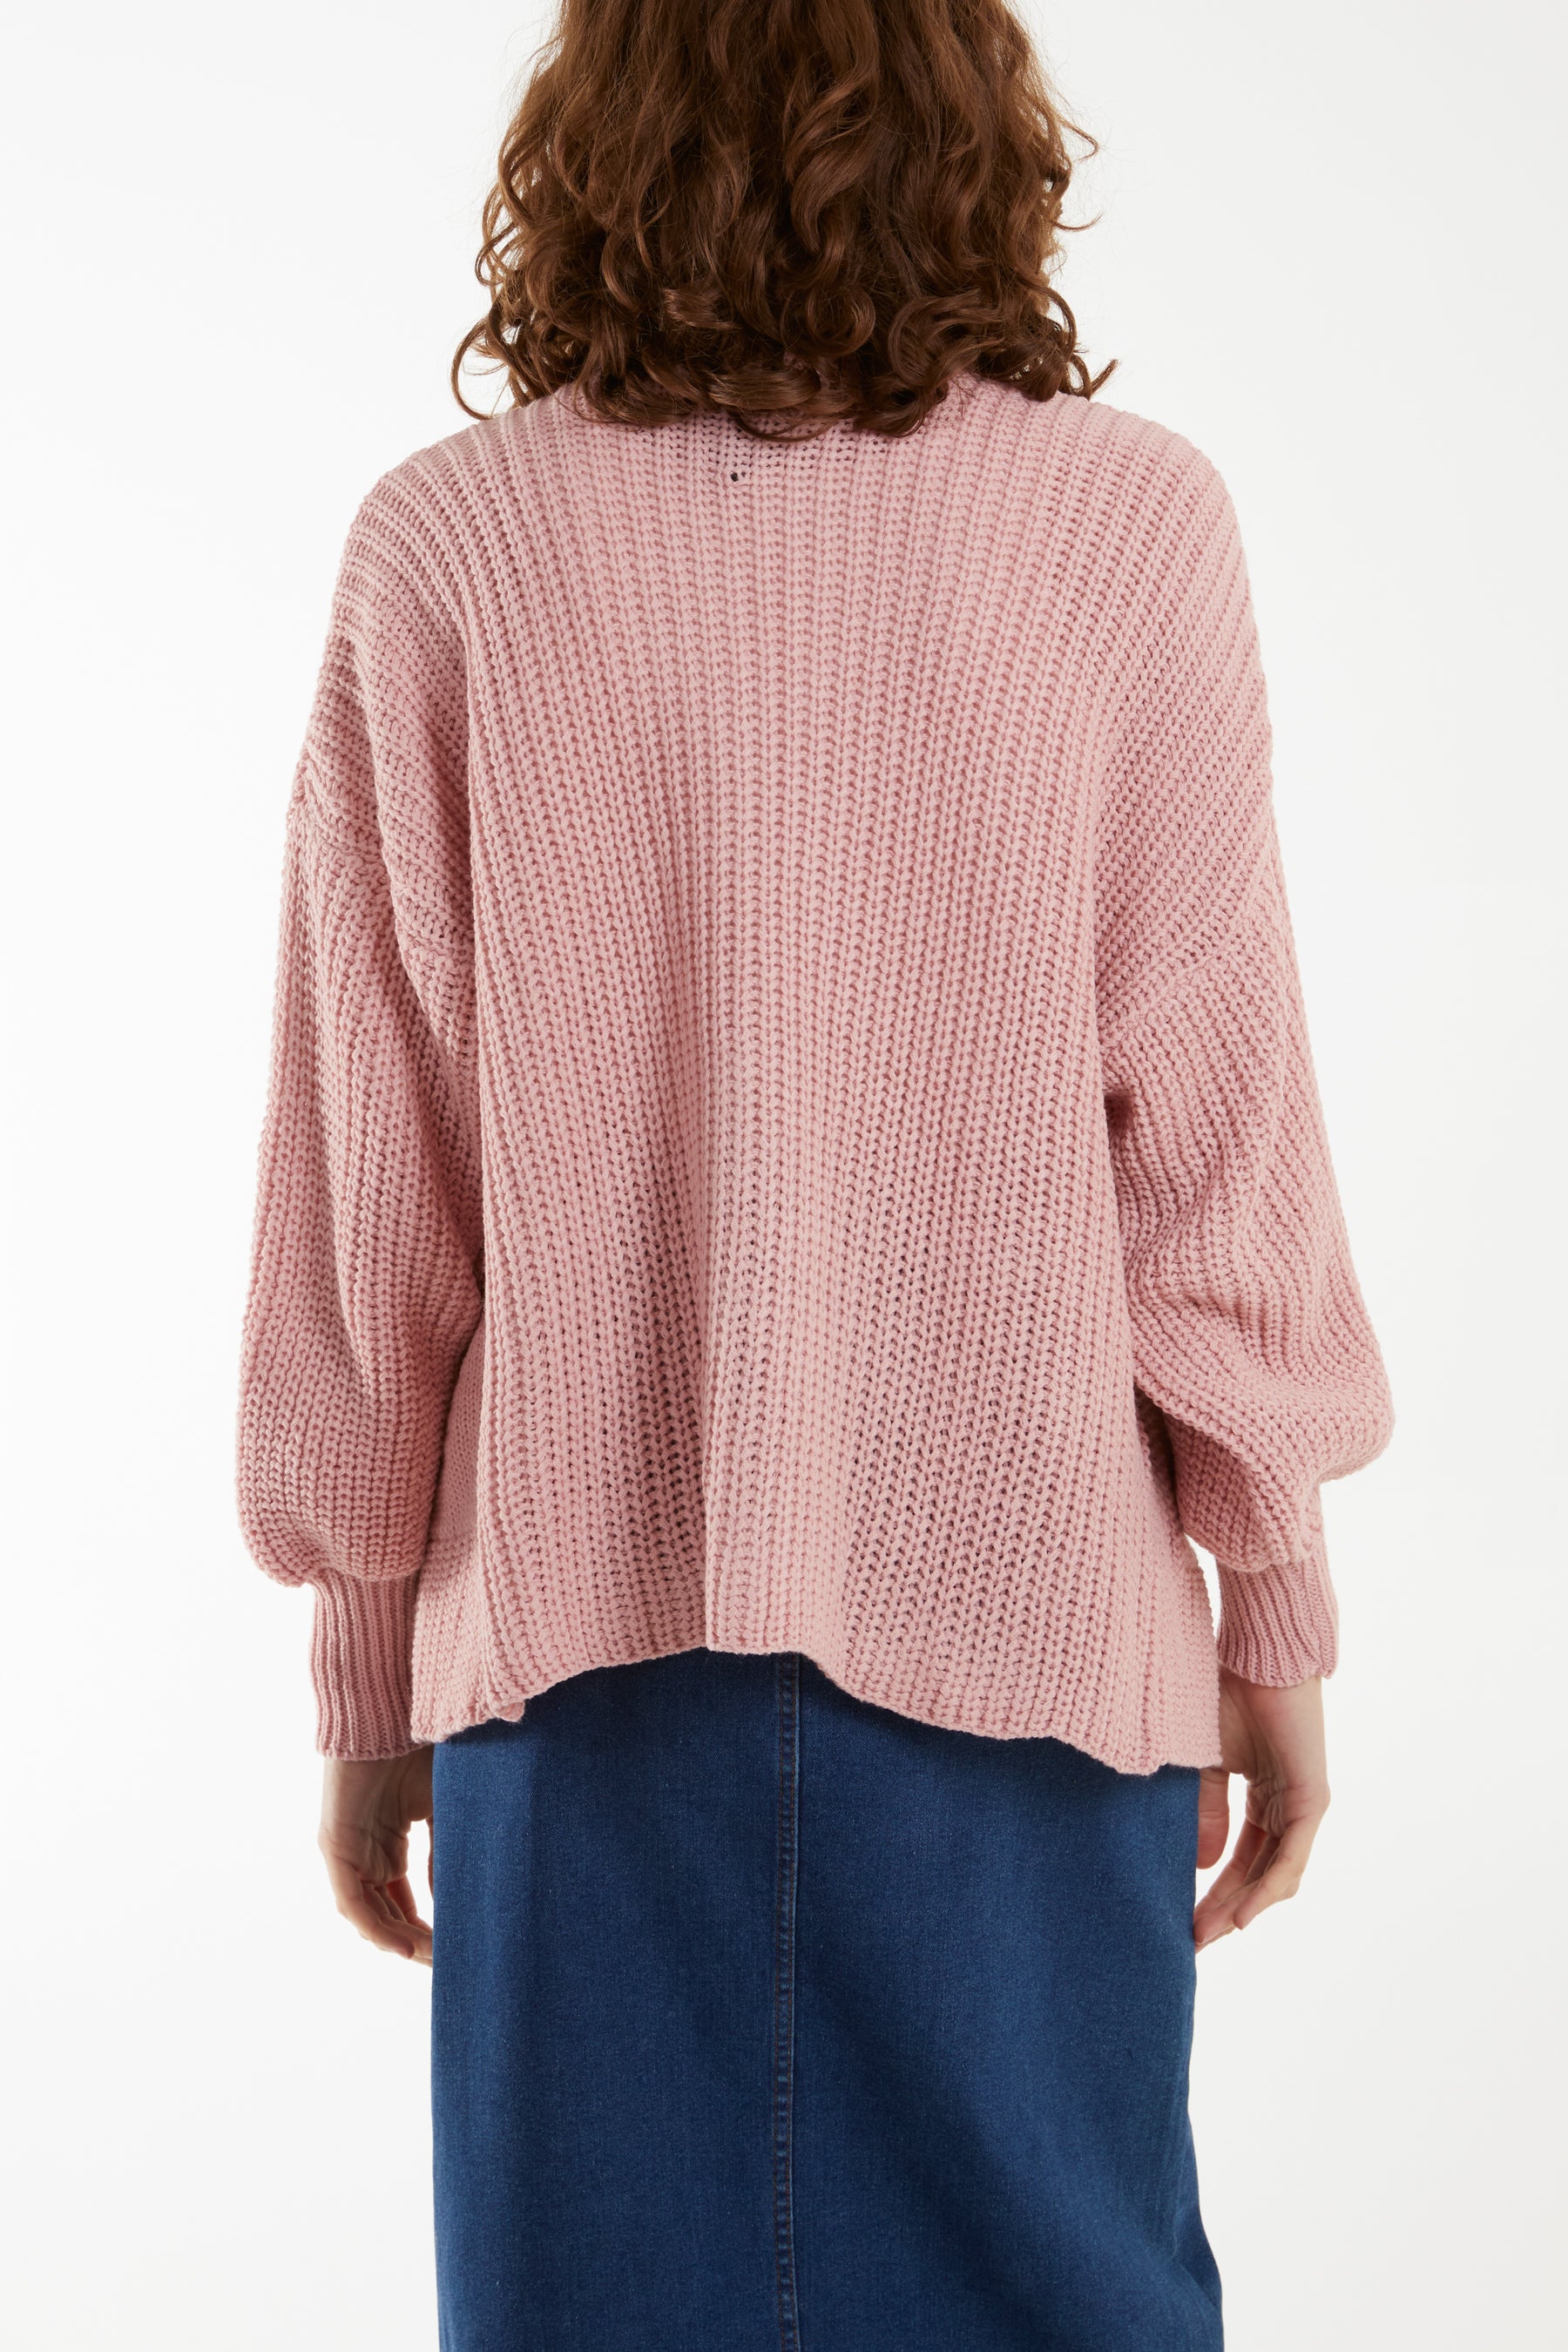 Edge To Edge Knitted Short Cardigan